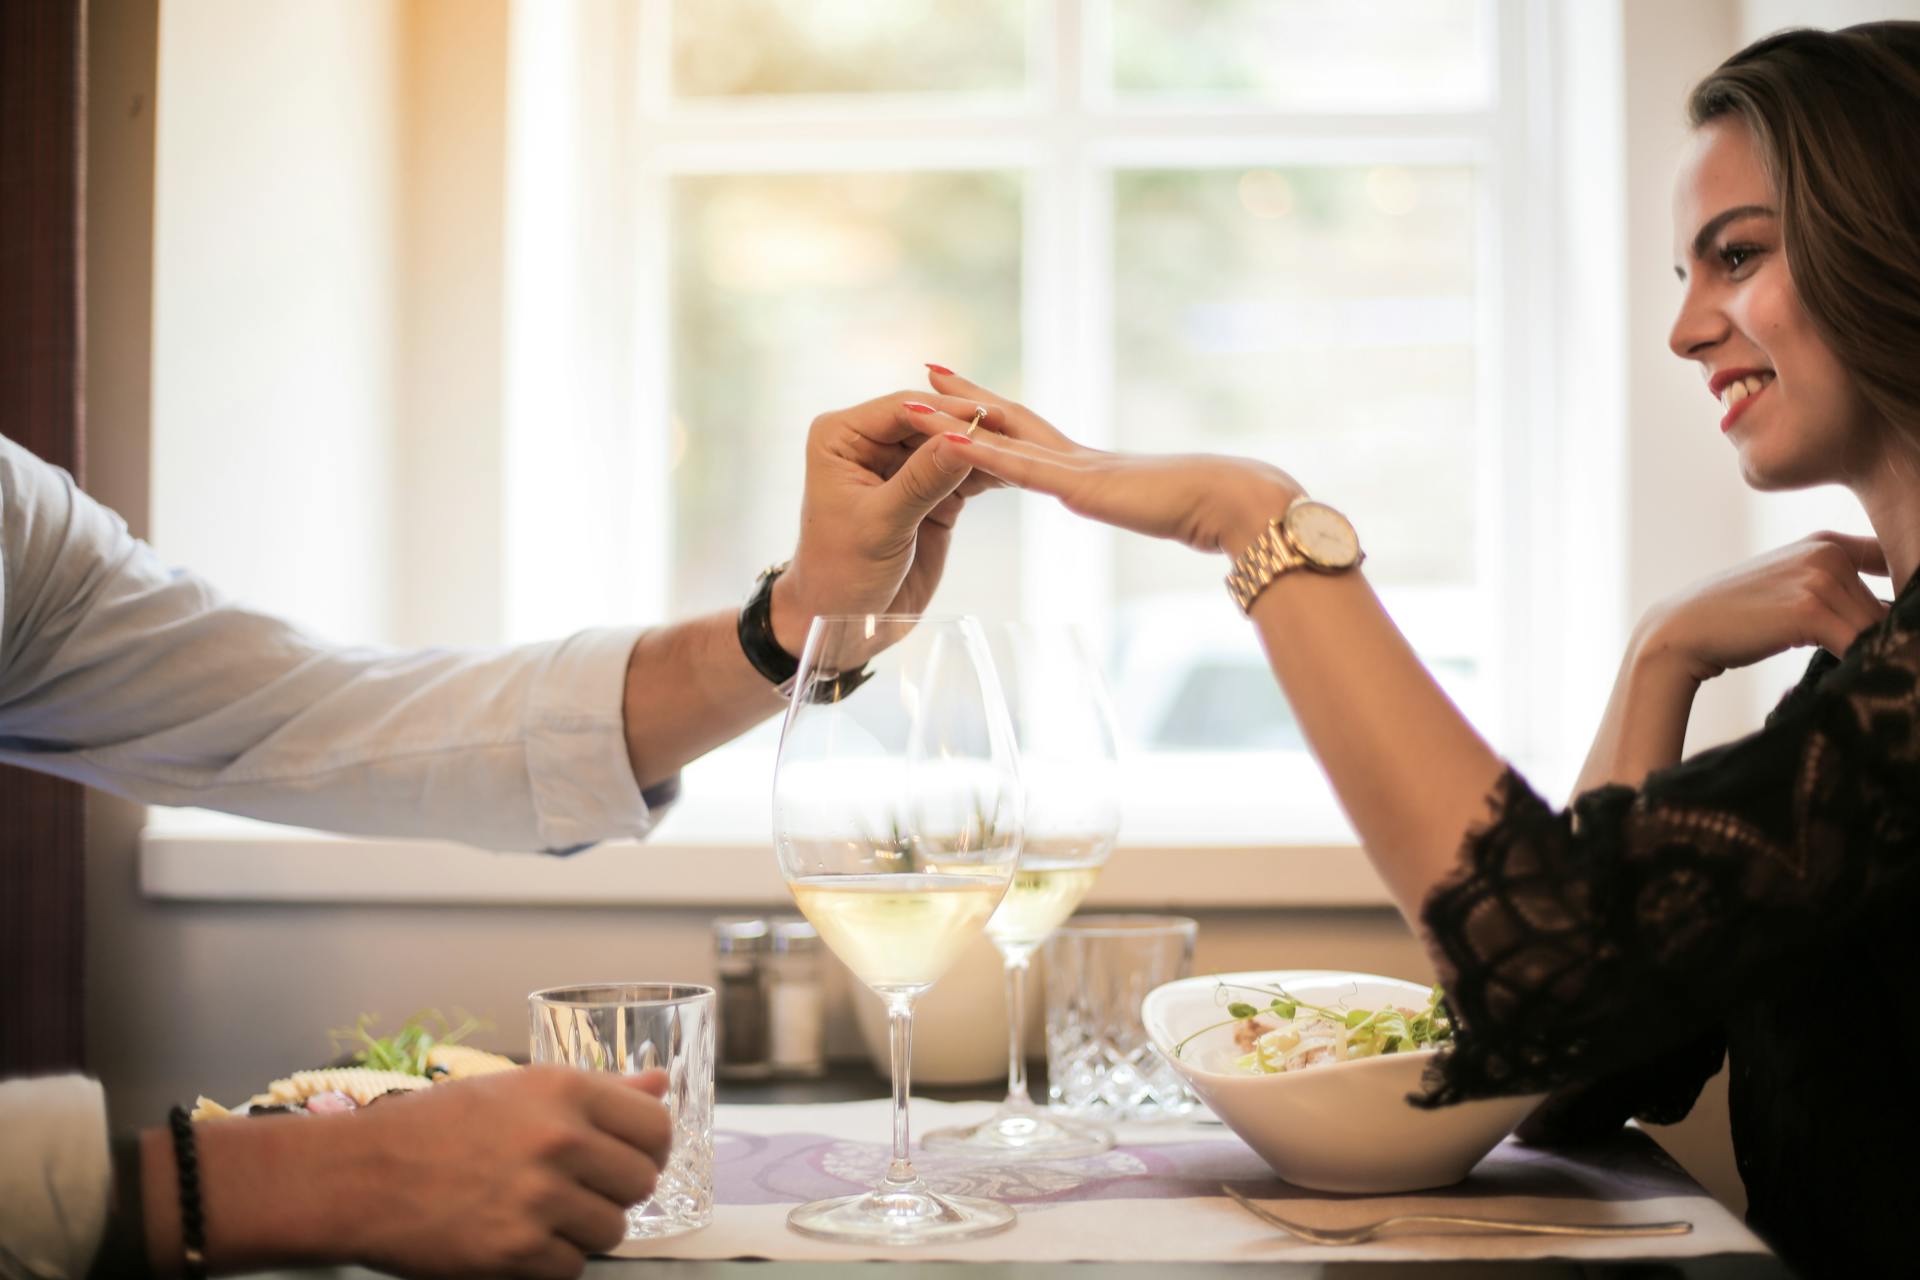 A close-up shot of a man sliding a ring on his girlfriend's finger during dinner | Source: Pexels